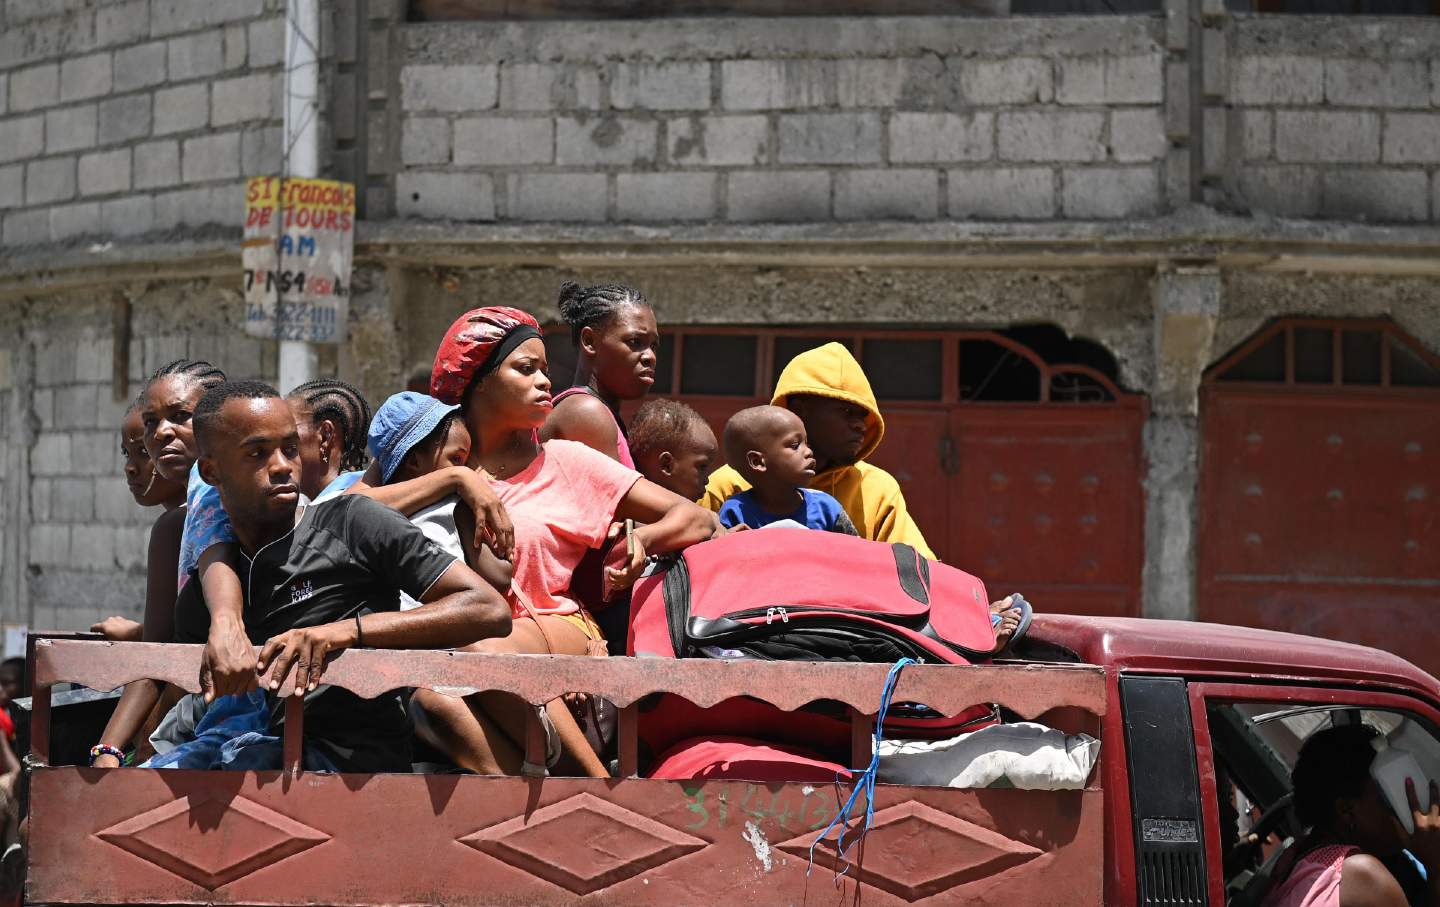 Port-au-Prince residents evacuate the city in a truck